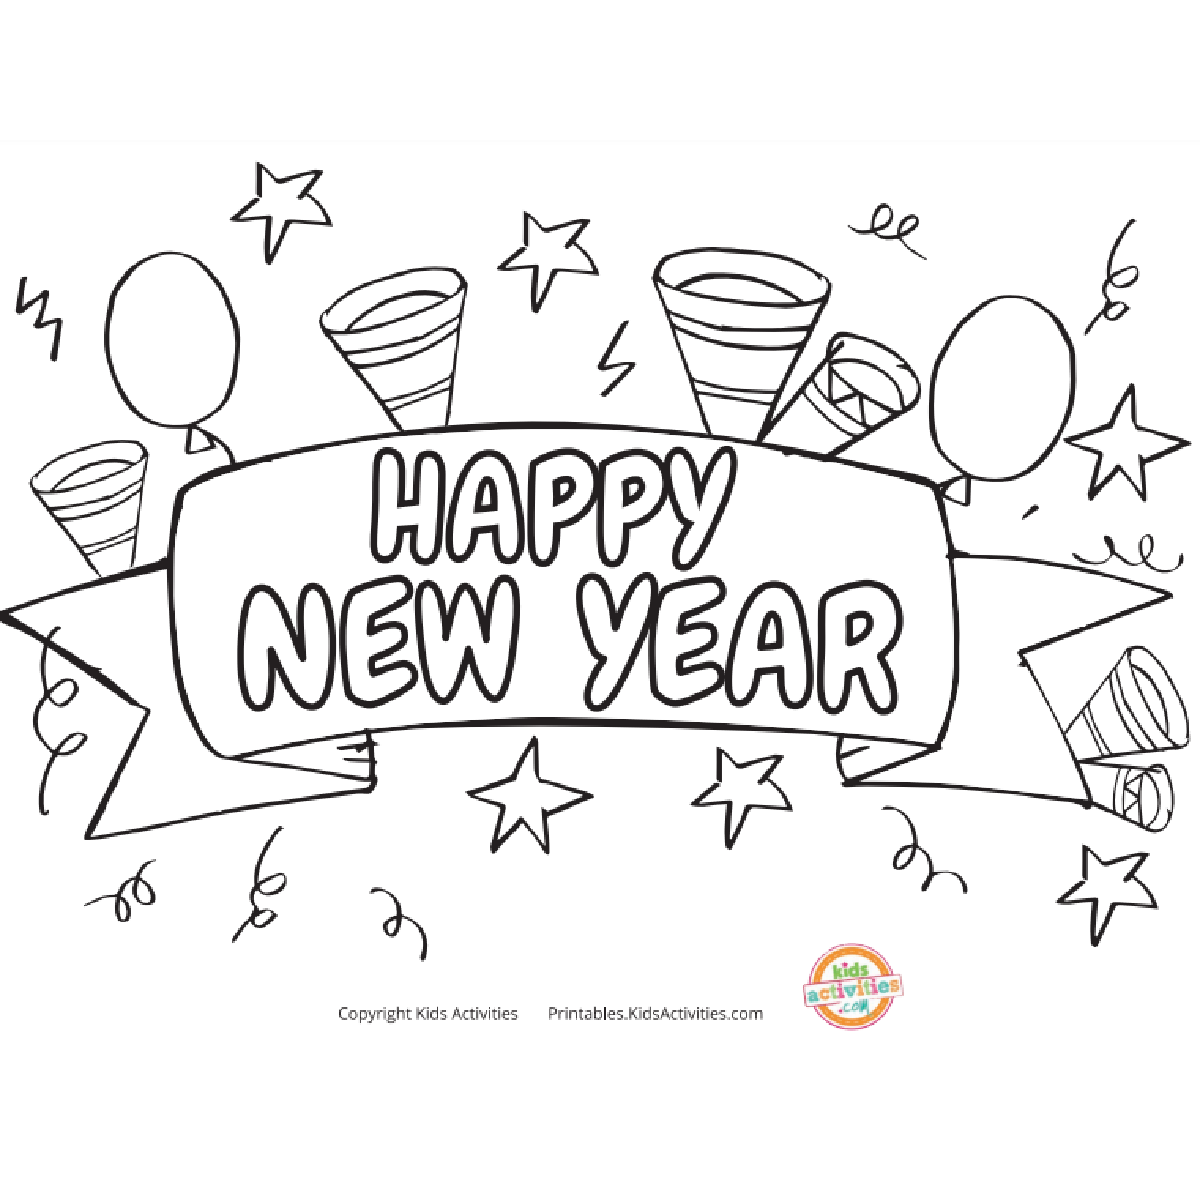 Free printable happy new year coloring page kids activities blog